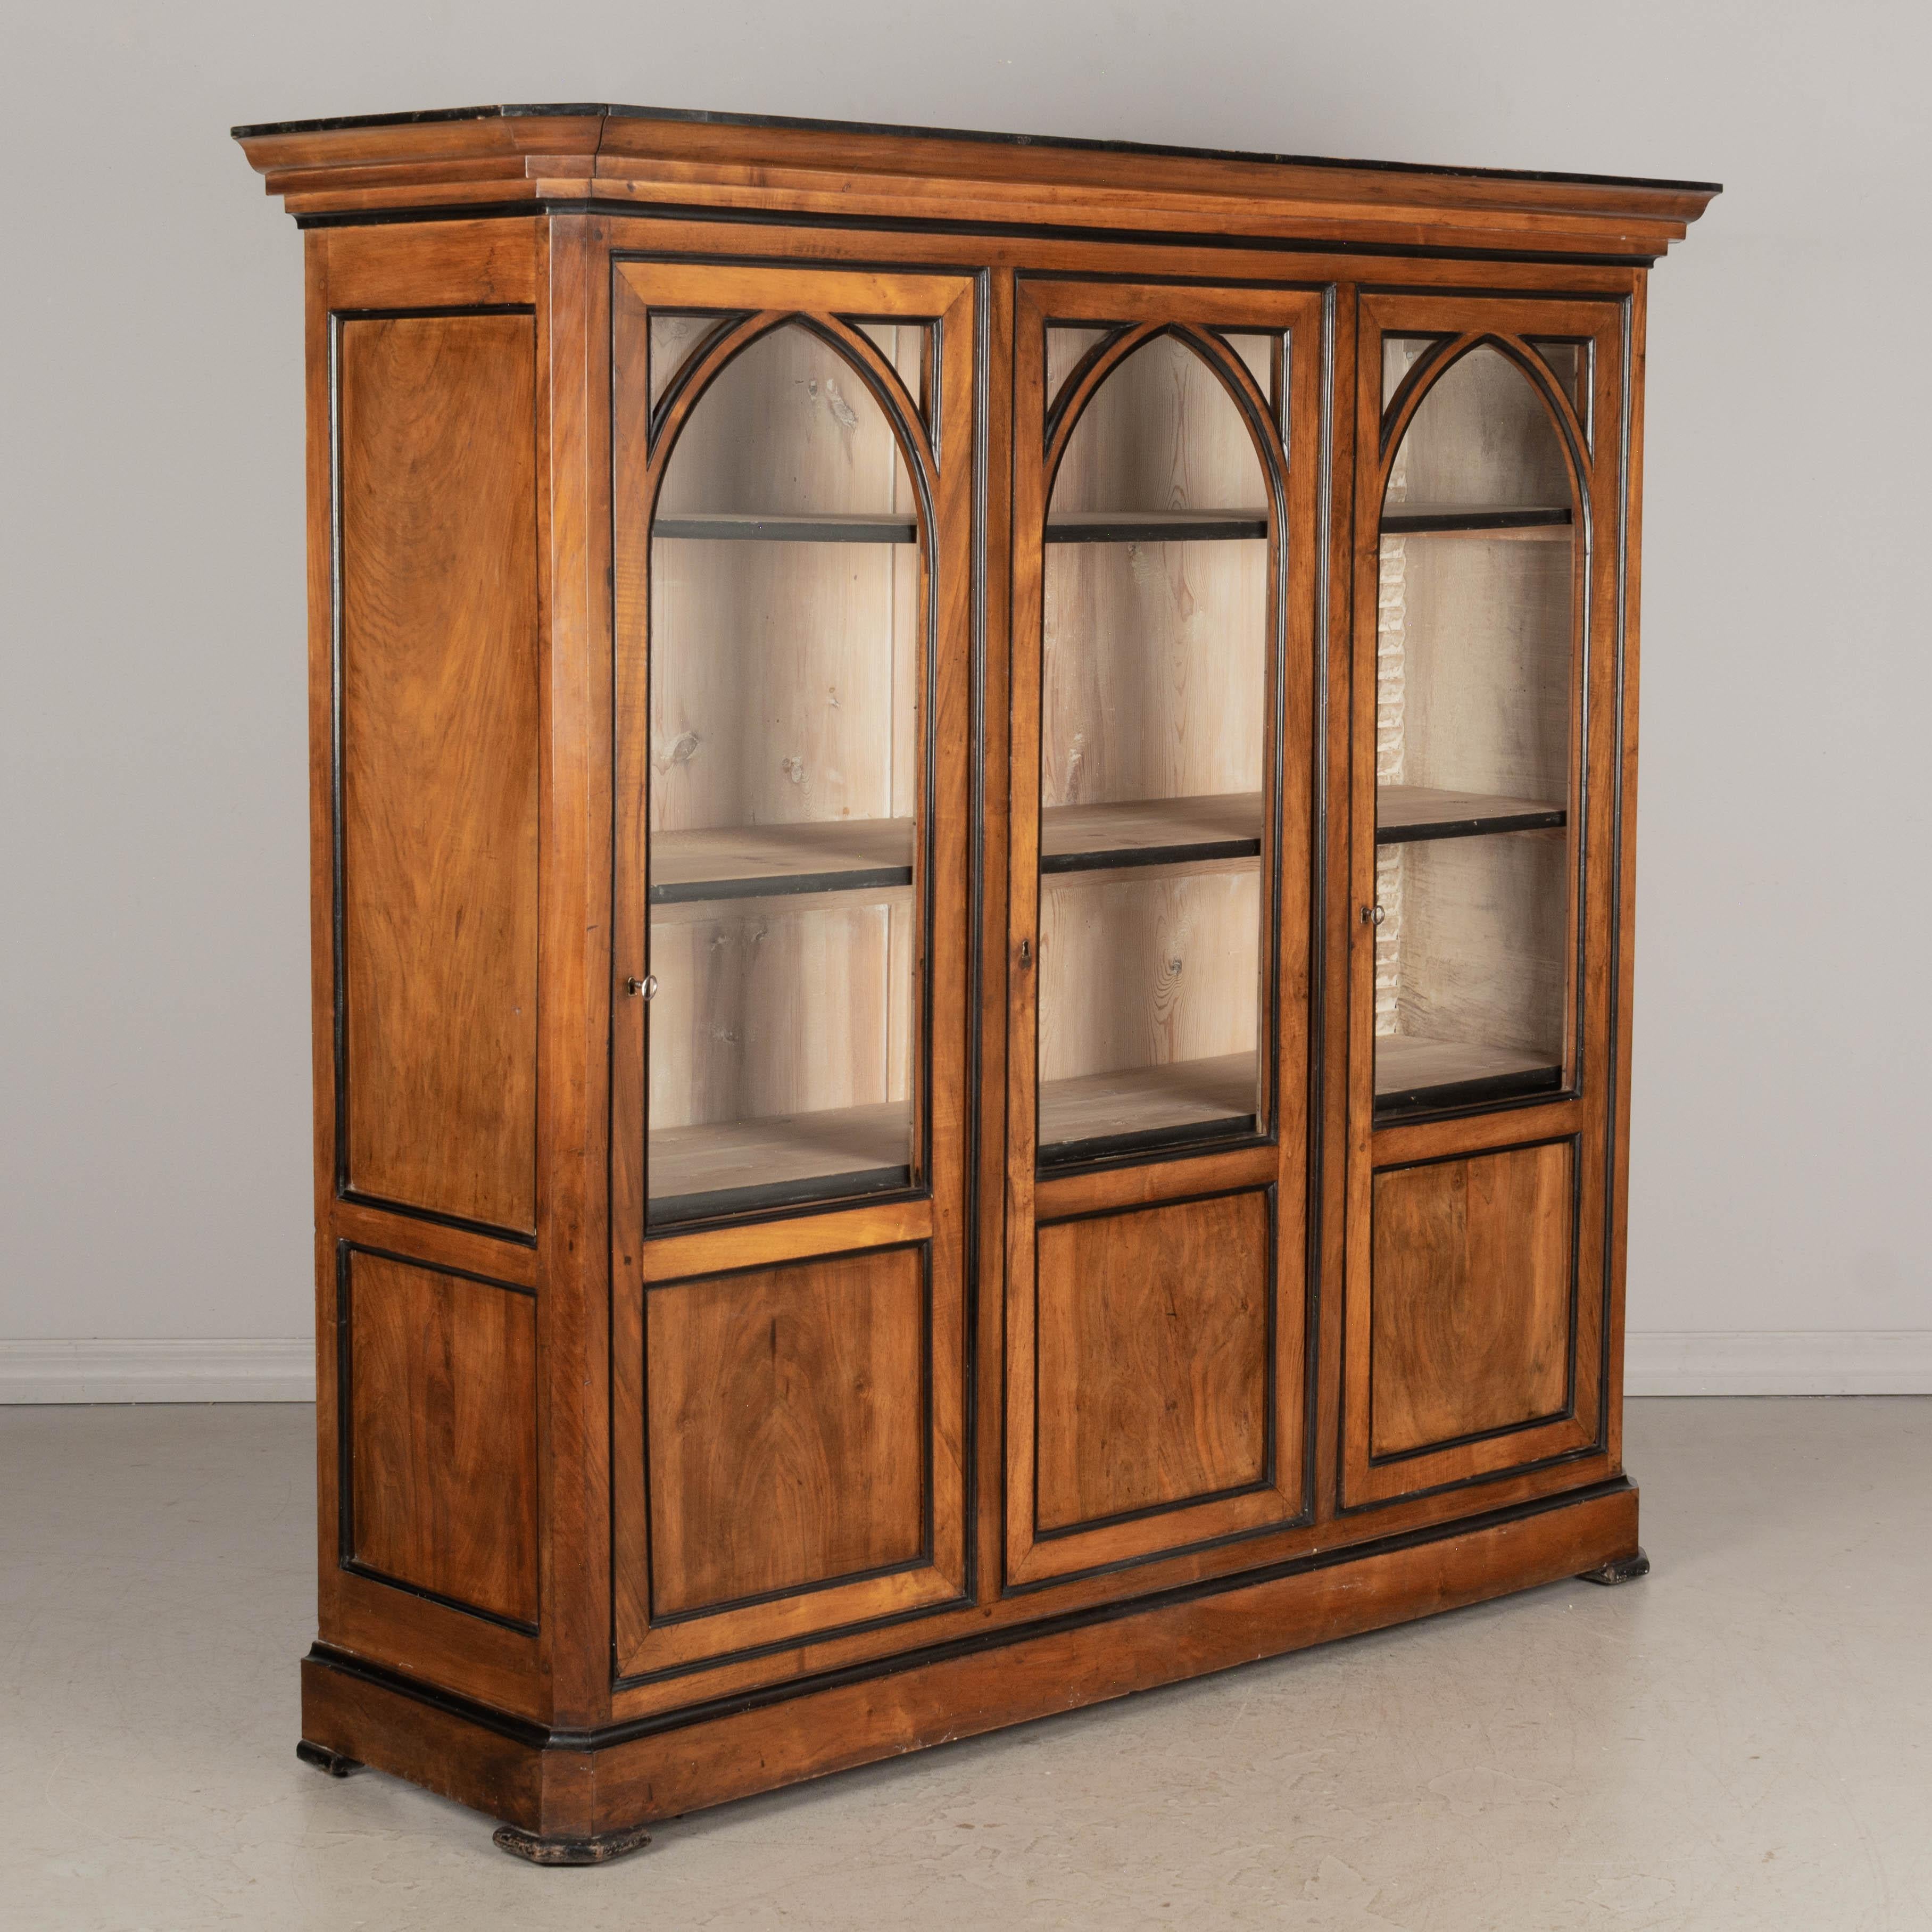 A pair of 19th century French Napoleon III bibliotheques, or bookcases made of solid walnut with ebonized trim and paned glass doors. Interior is unfinished and has three adjustable shelves with black trimmed edge. Locks in working order with four